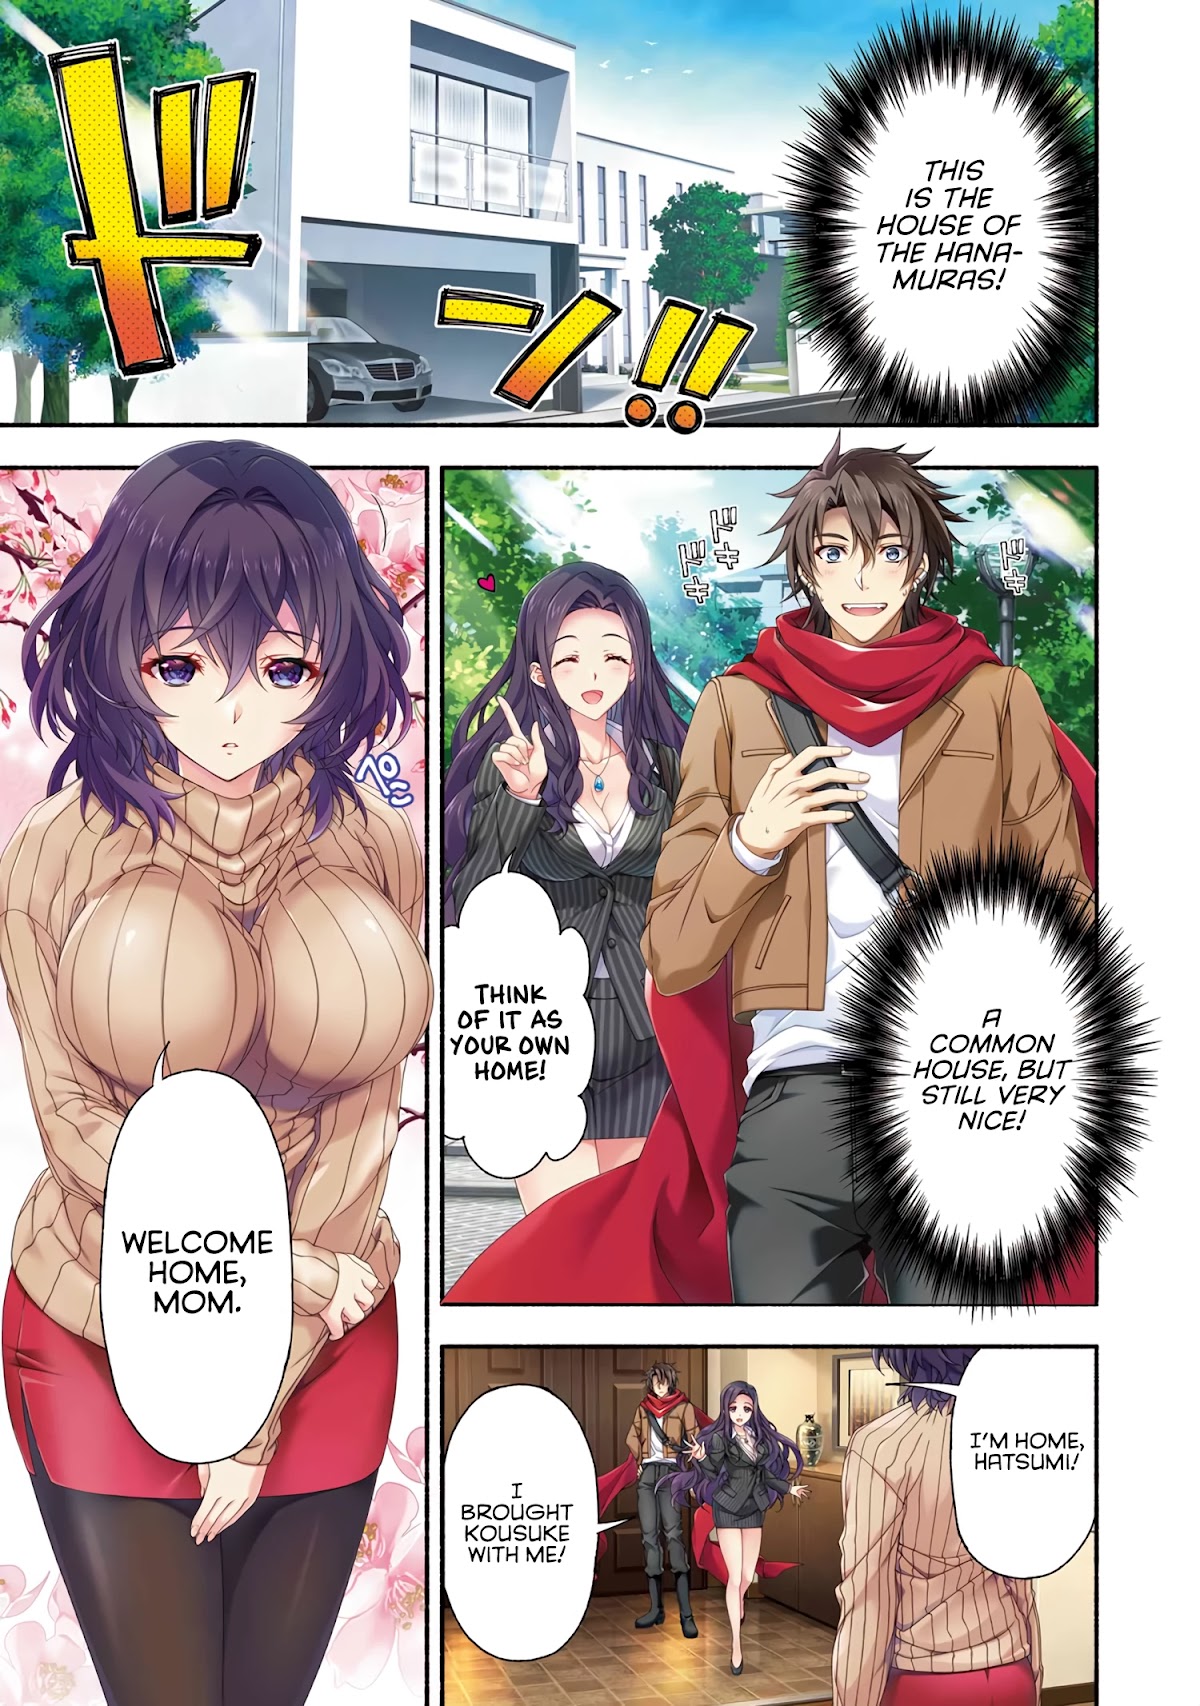 Magical★Explorer - It Seems I Have Become A Friend Of The Protagonist In An Eroge World, But Because Magic Is Fun I Have Abandoned The Role And Train Myself - Page 2